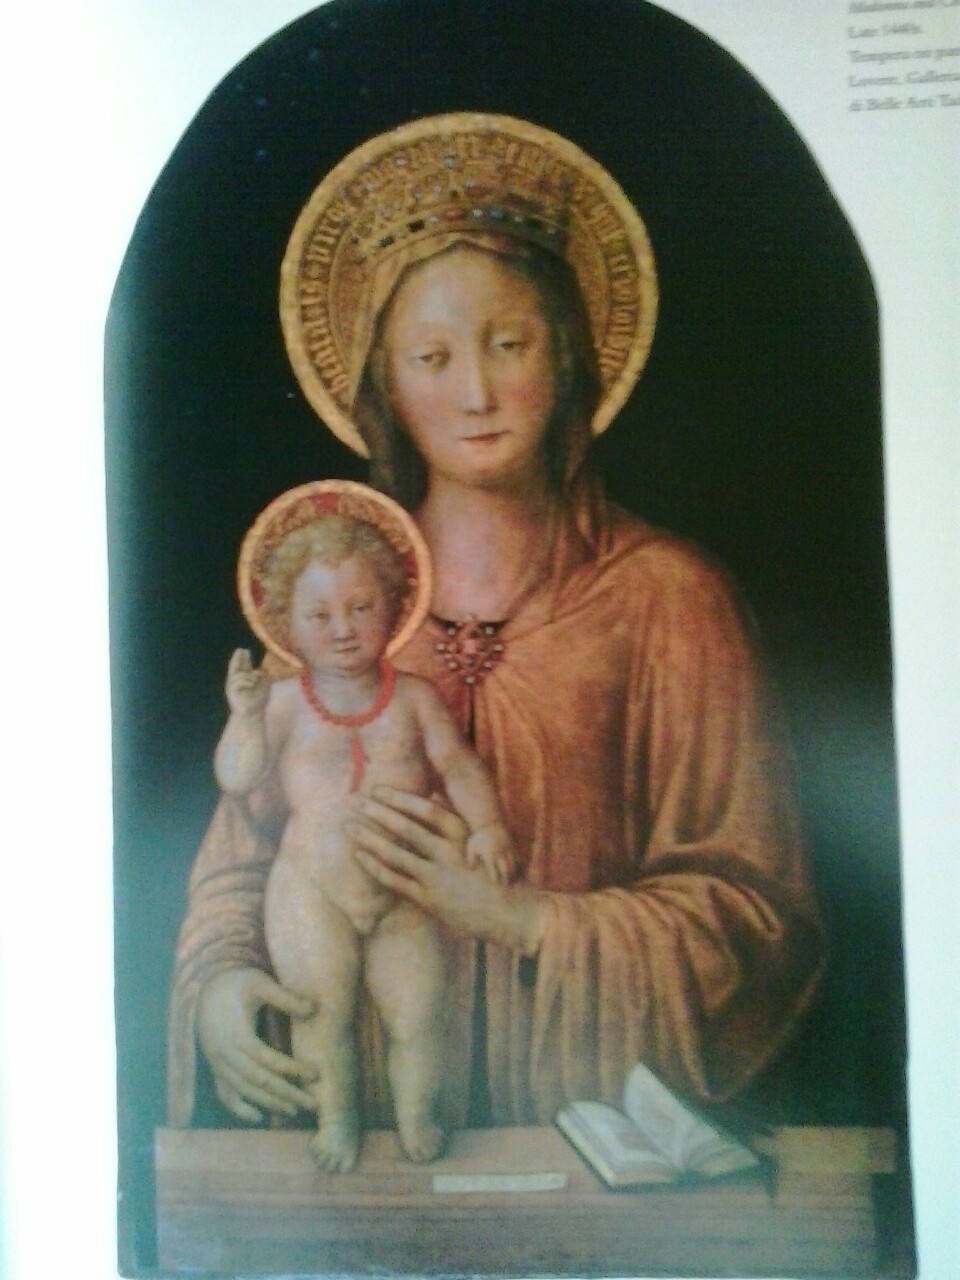 for fuck’s sake, the baby is even making a “holding a joint” hand
(madonna and child, jacopo bellini)